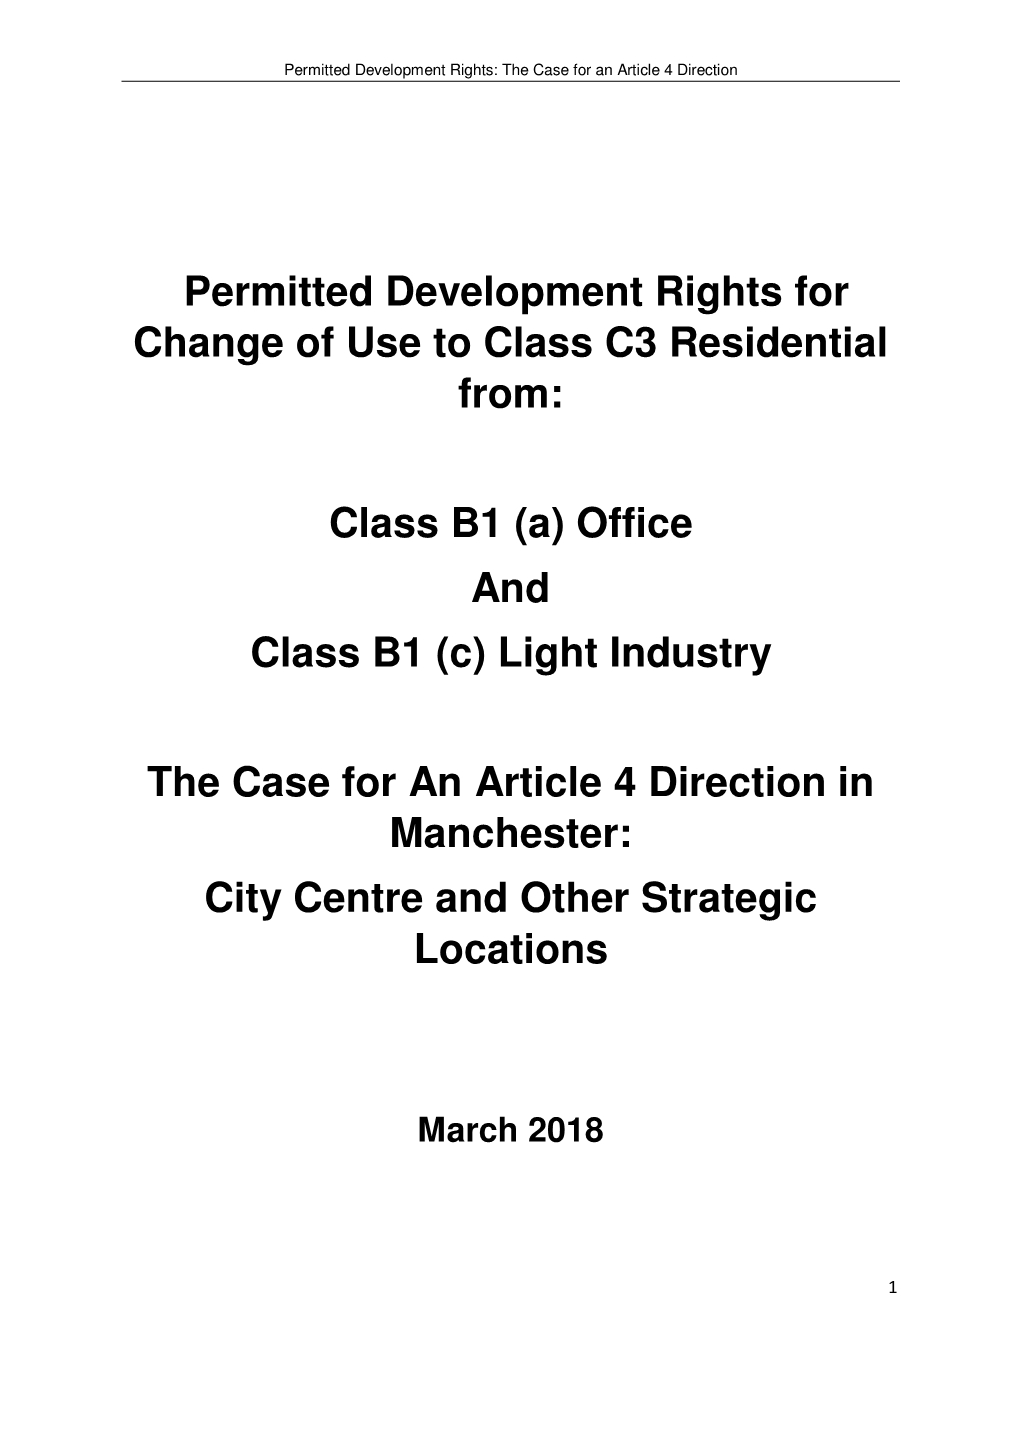 Permitted Development Rights for Change of Use to Class C3 Residential From